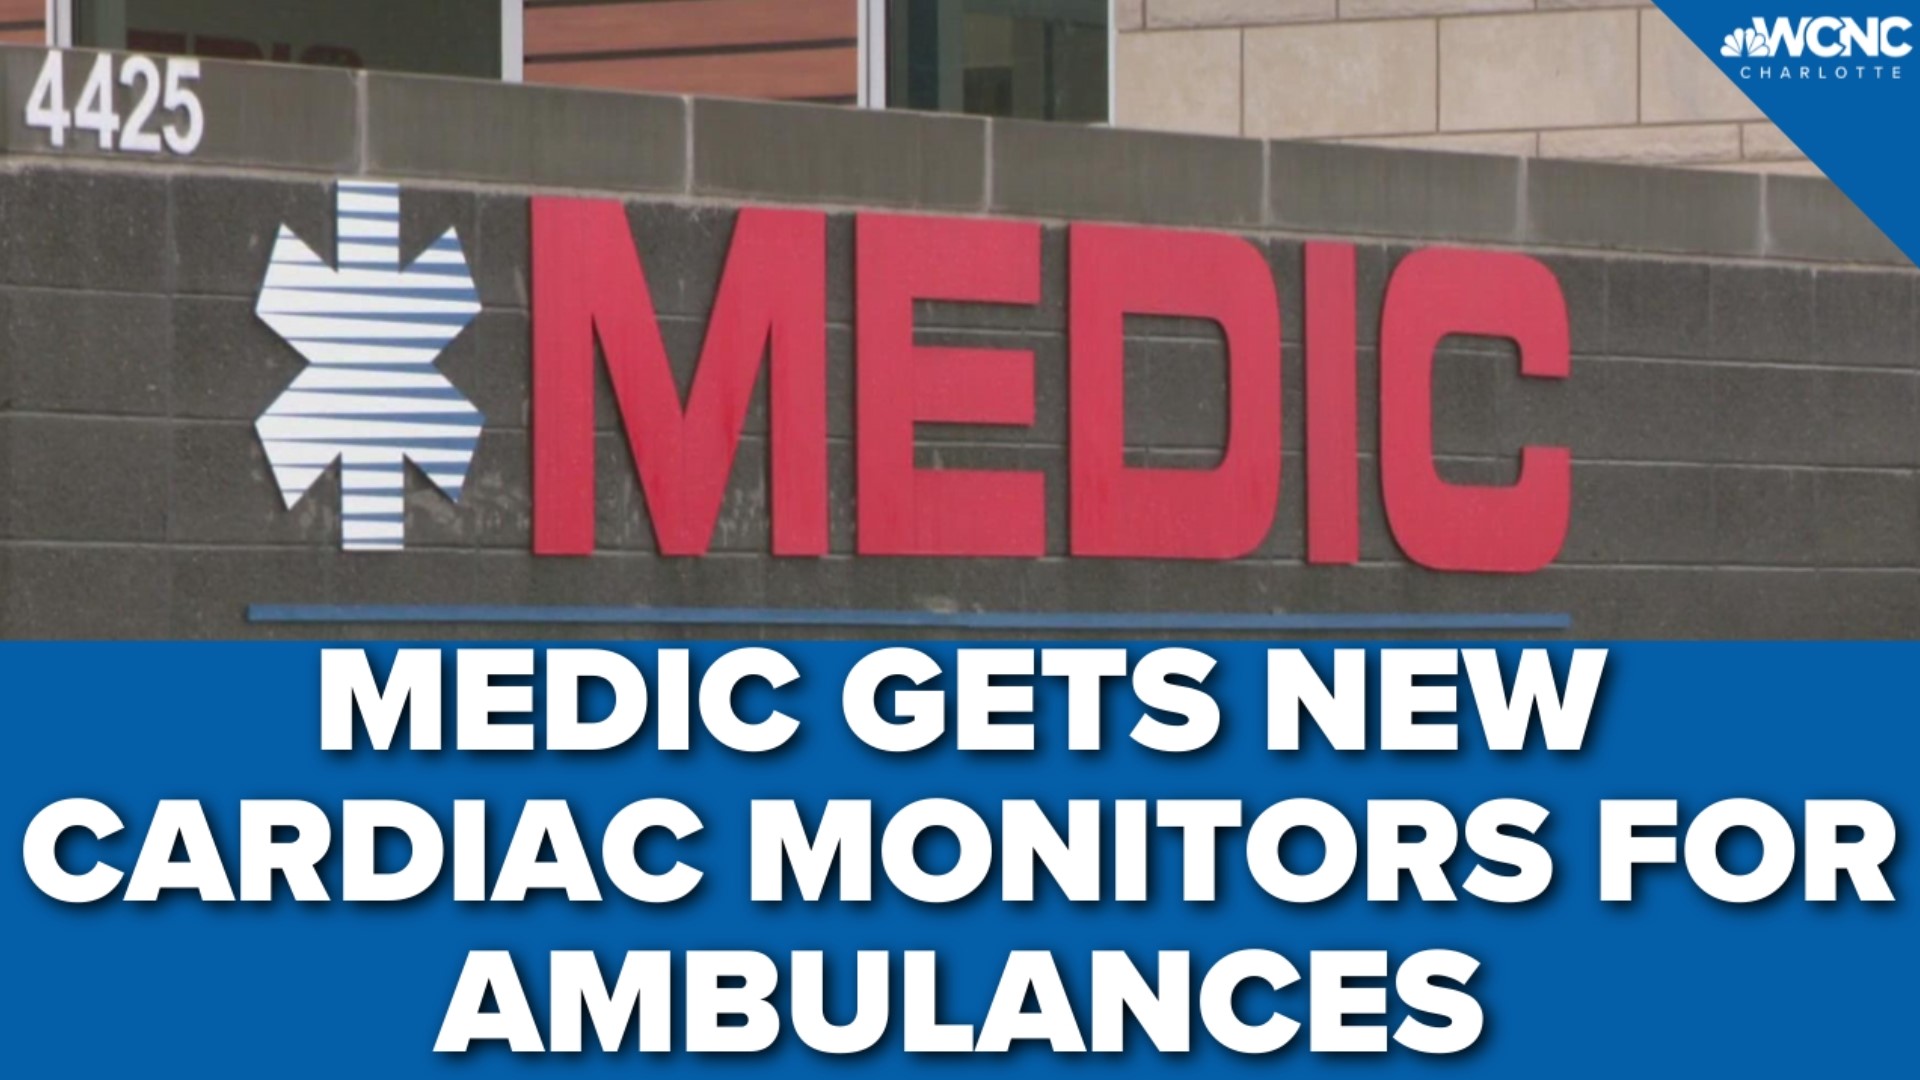 The monitors will essentially be used for every patient and will help paramedics work faster.